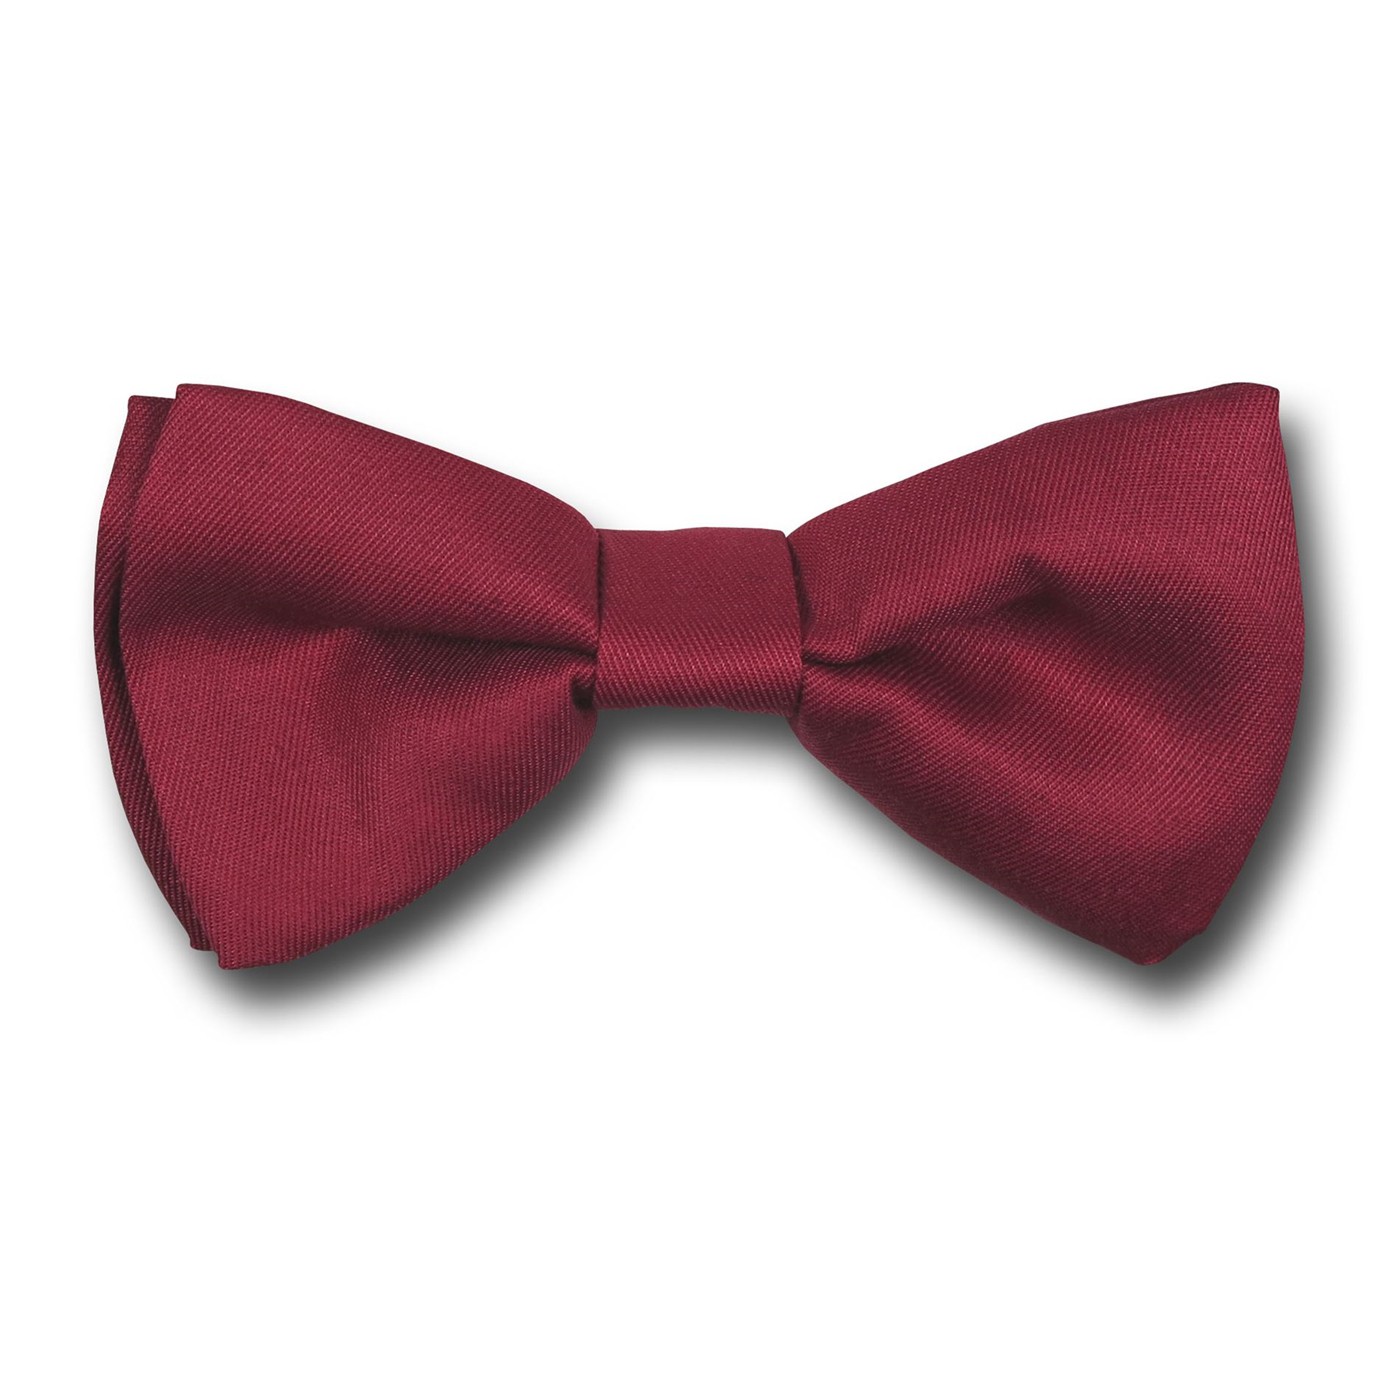 Doctor Who 11th Doctor Bow Tie